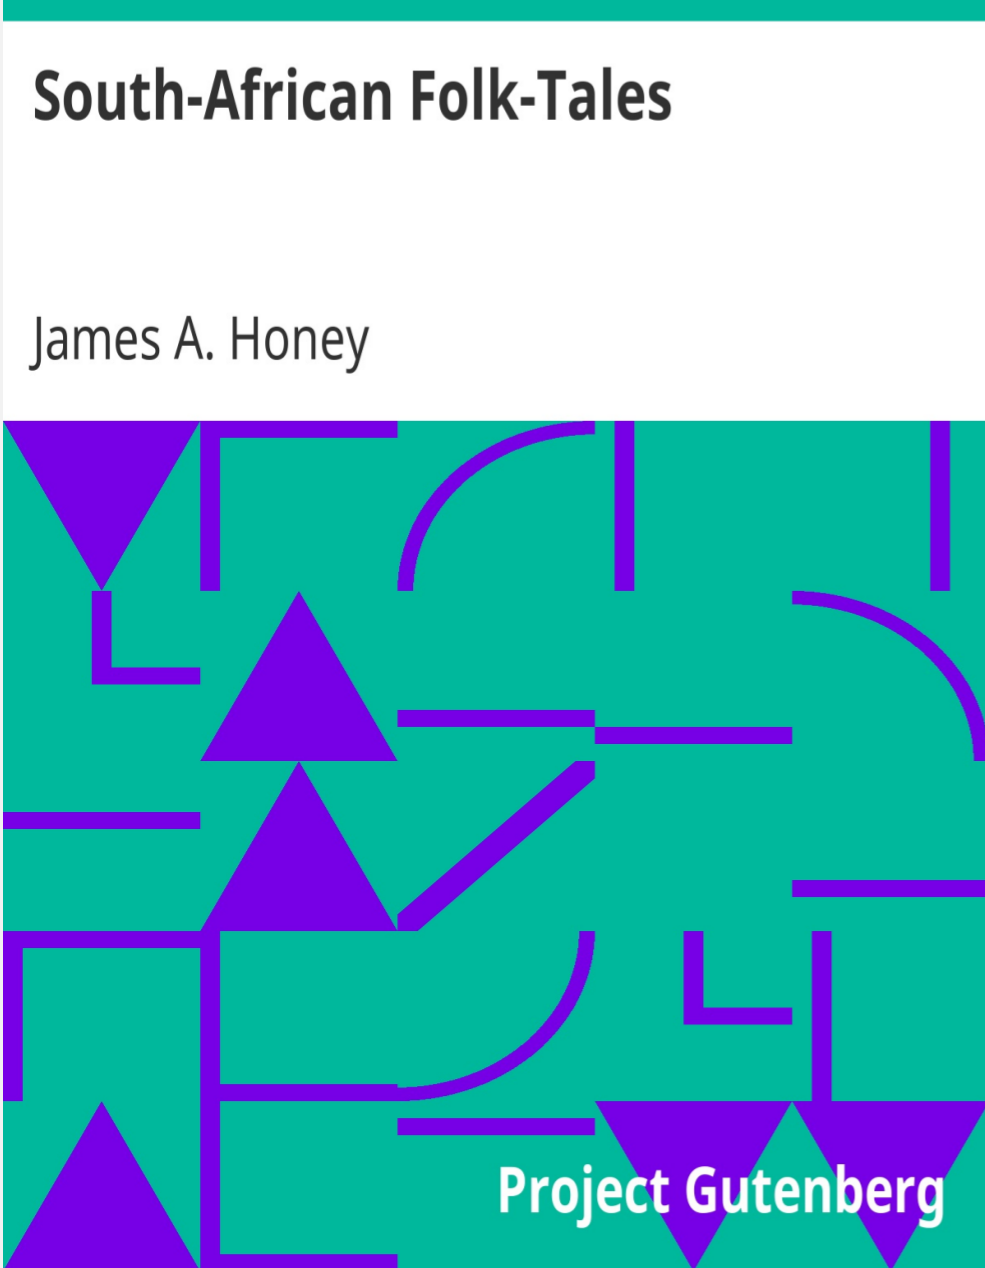 SOUTH AFRICAN FOLK TALES BY JAMES A. HONEY